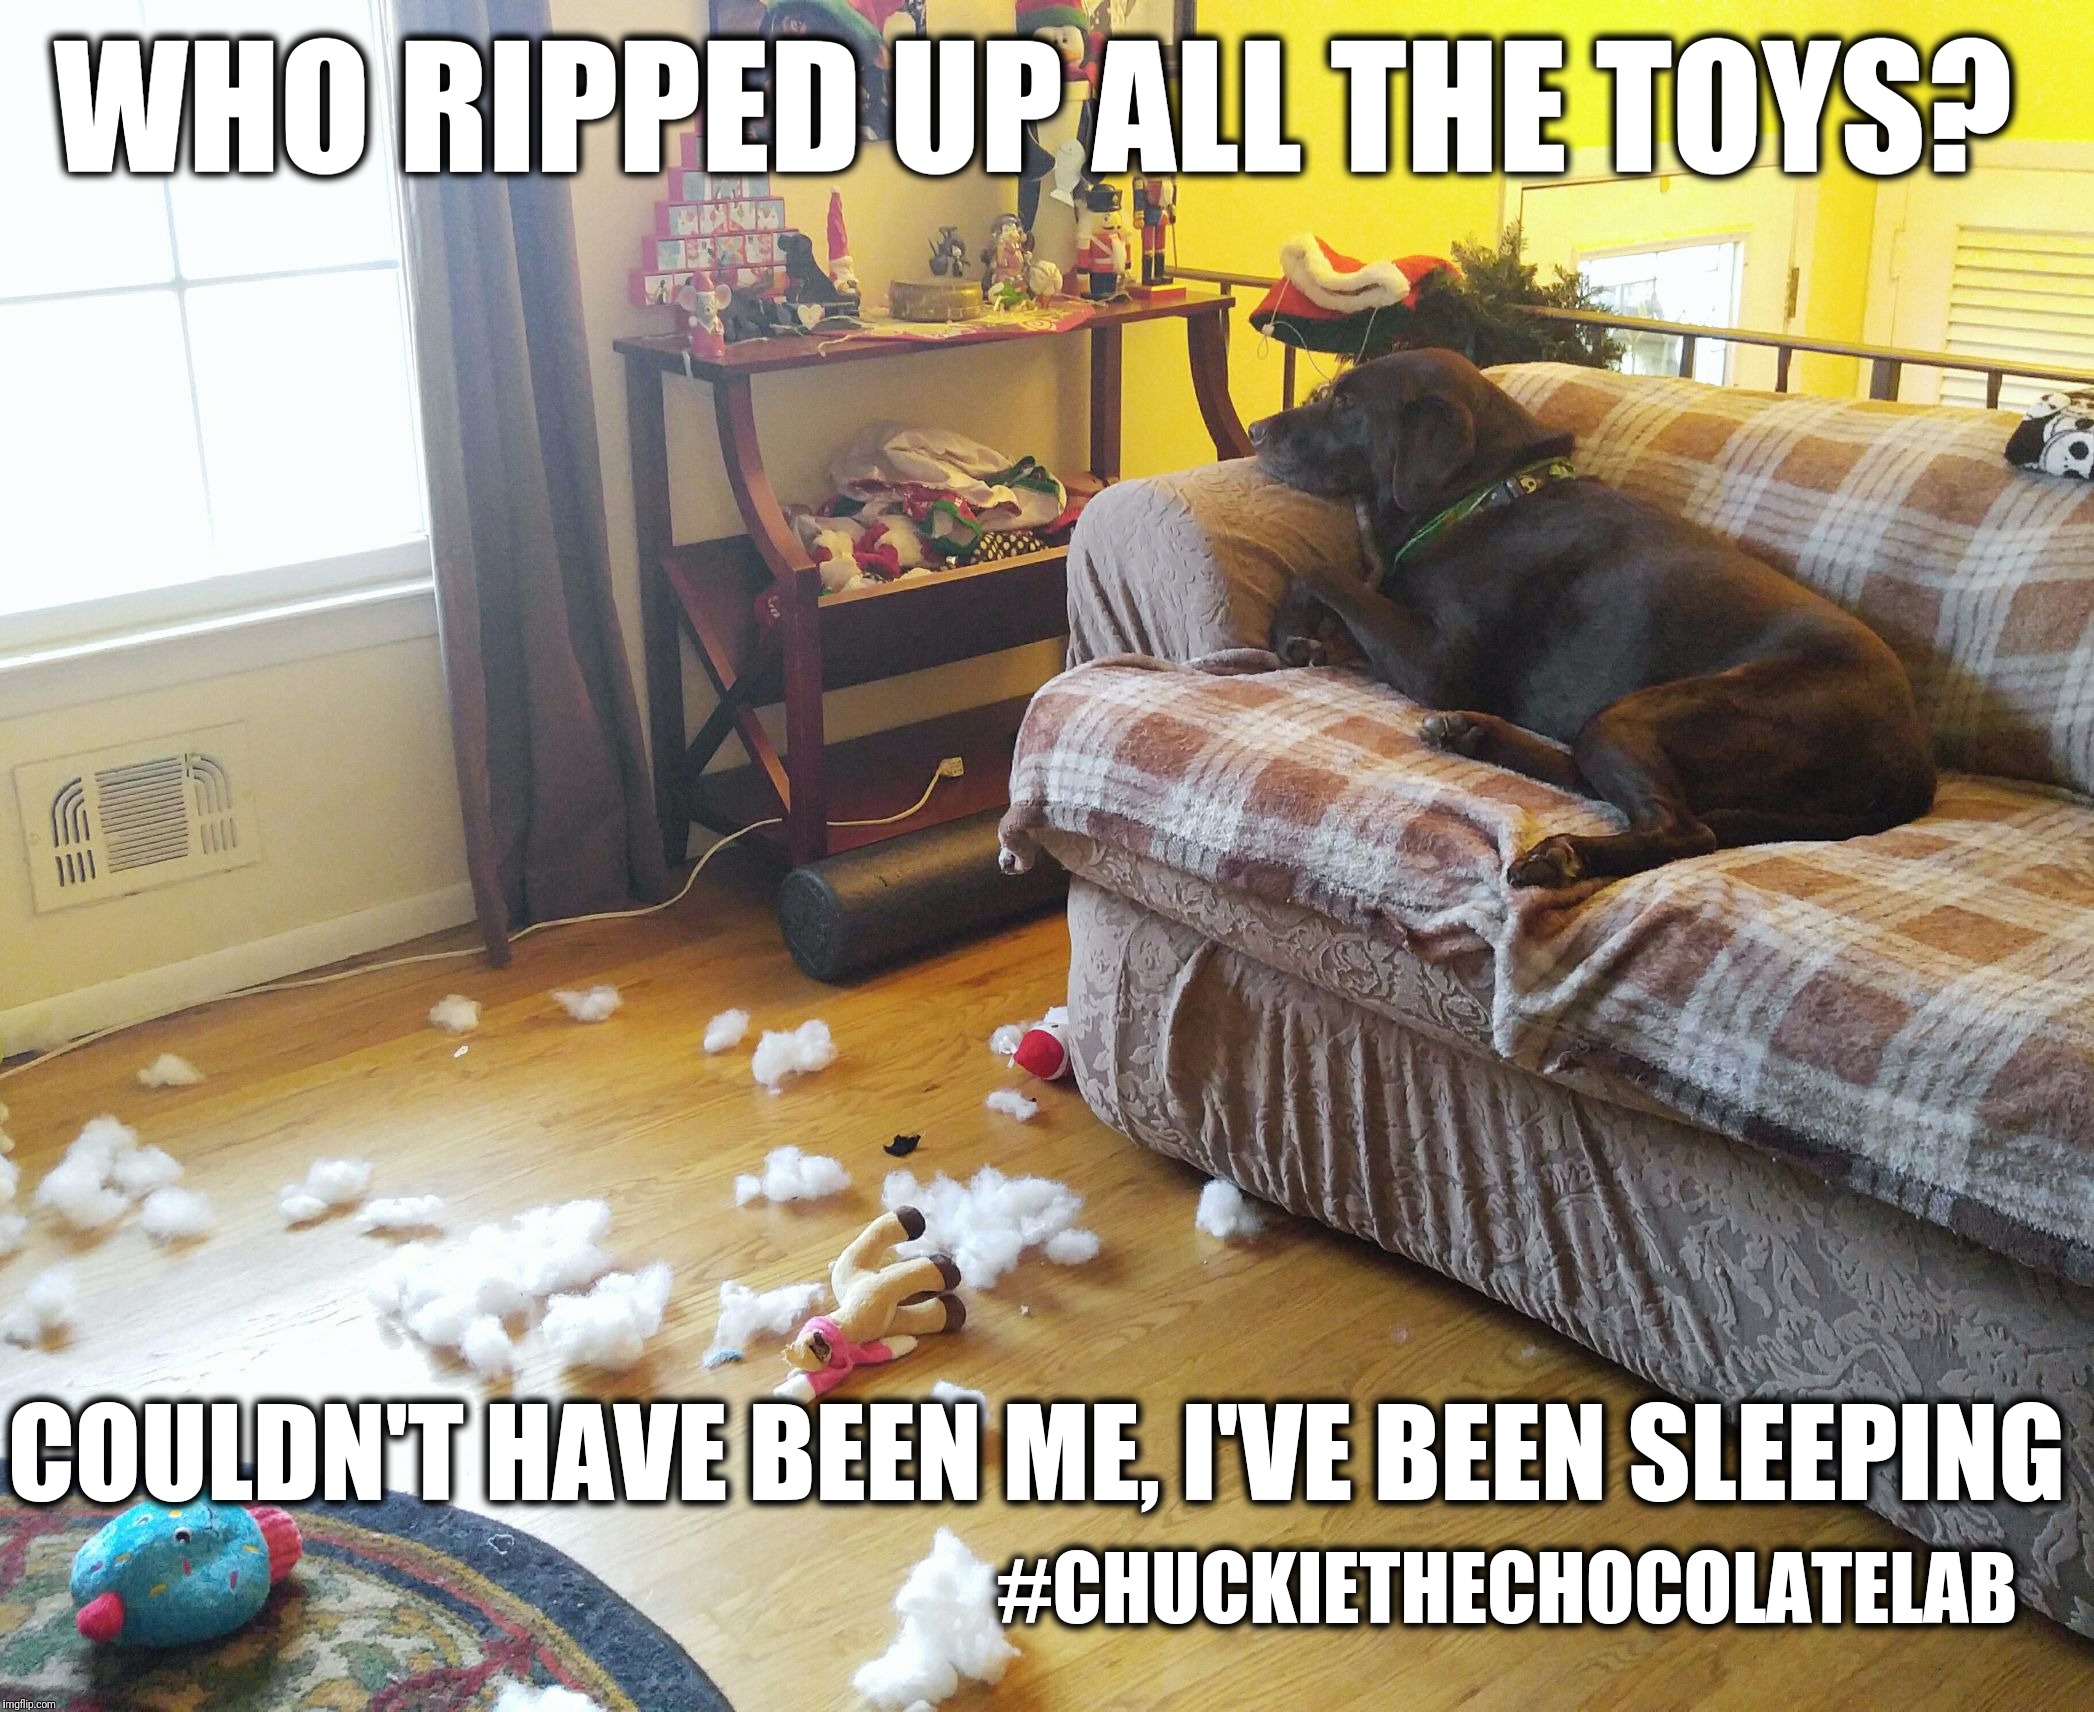 Who ripped up all the toys?  | WHO RIPPED UP ALL THE TOYS? COULDN'T HAVE BEEN ME, I'VE BEEN SLEEPING; #CHUCKIETHECHOCOLATELAB | image tagged in chuckie the chocolate lab,naughty,bad dog,funny,memes,christmas memes | made w/ Imgflip meme maker